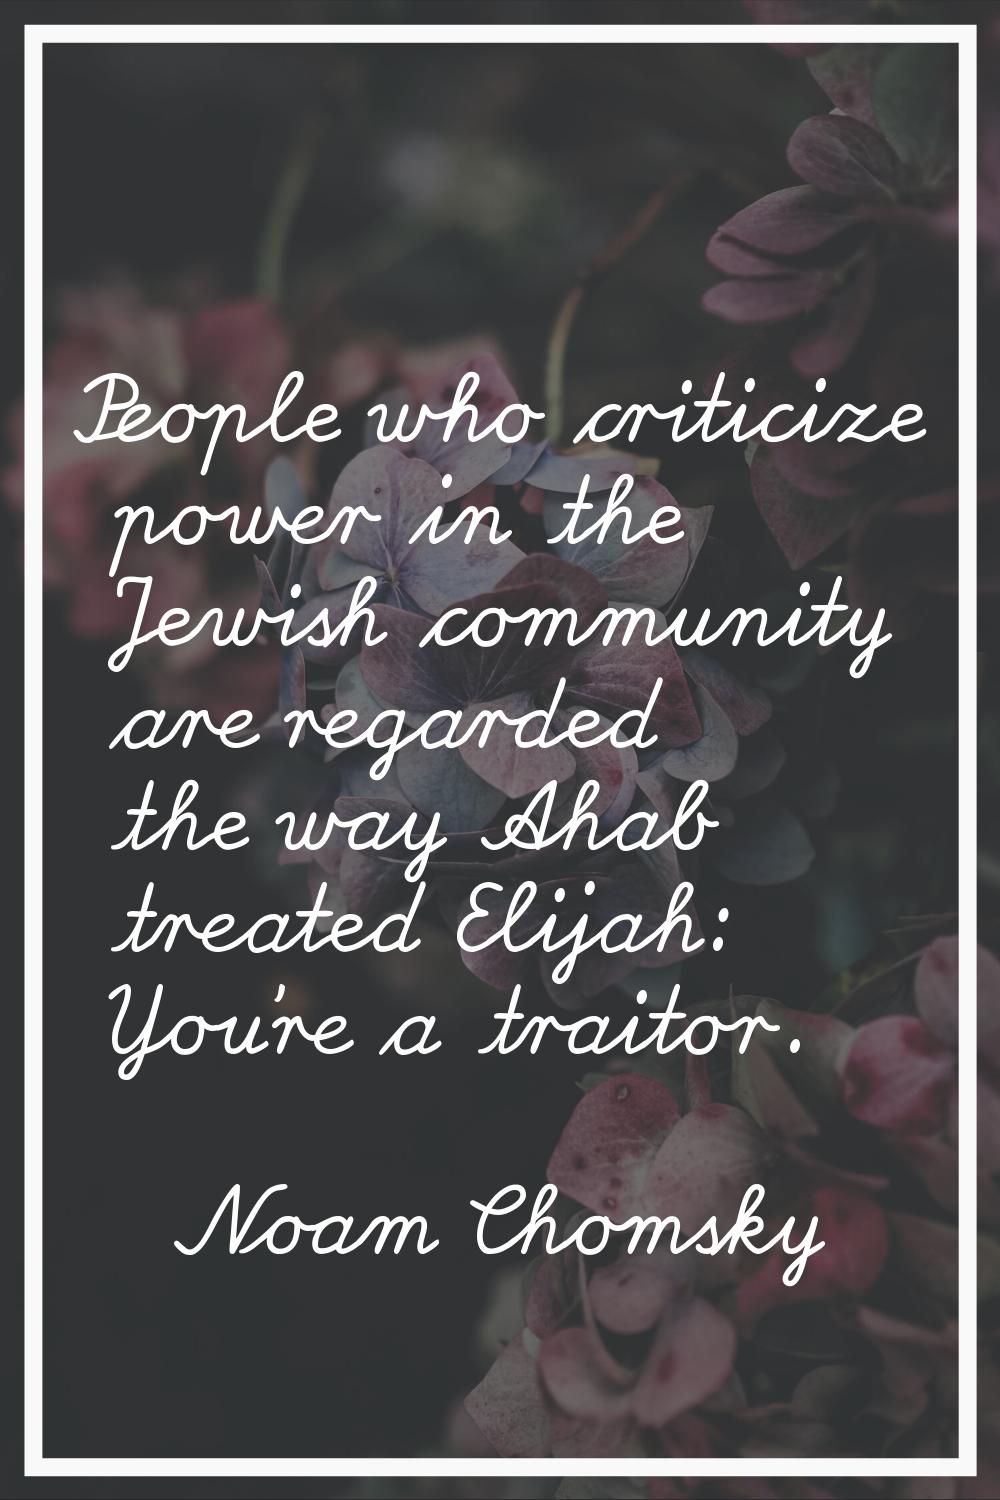 People who criticize power in the Jewish community are regarded the way Ahab treated Elijah: You're